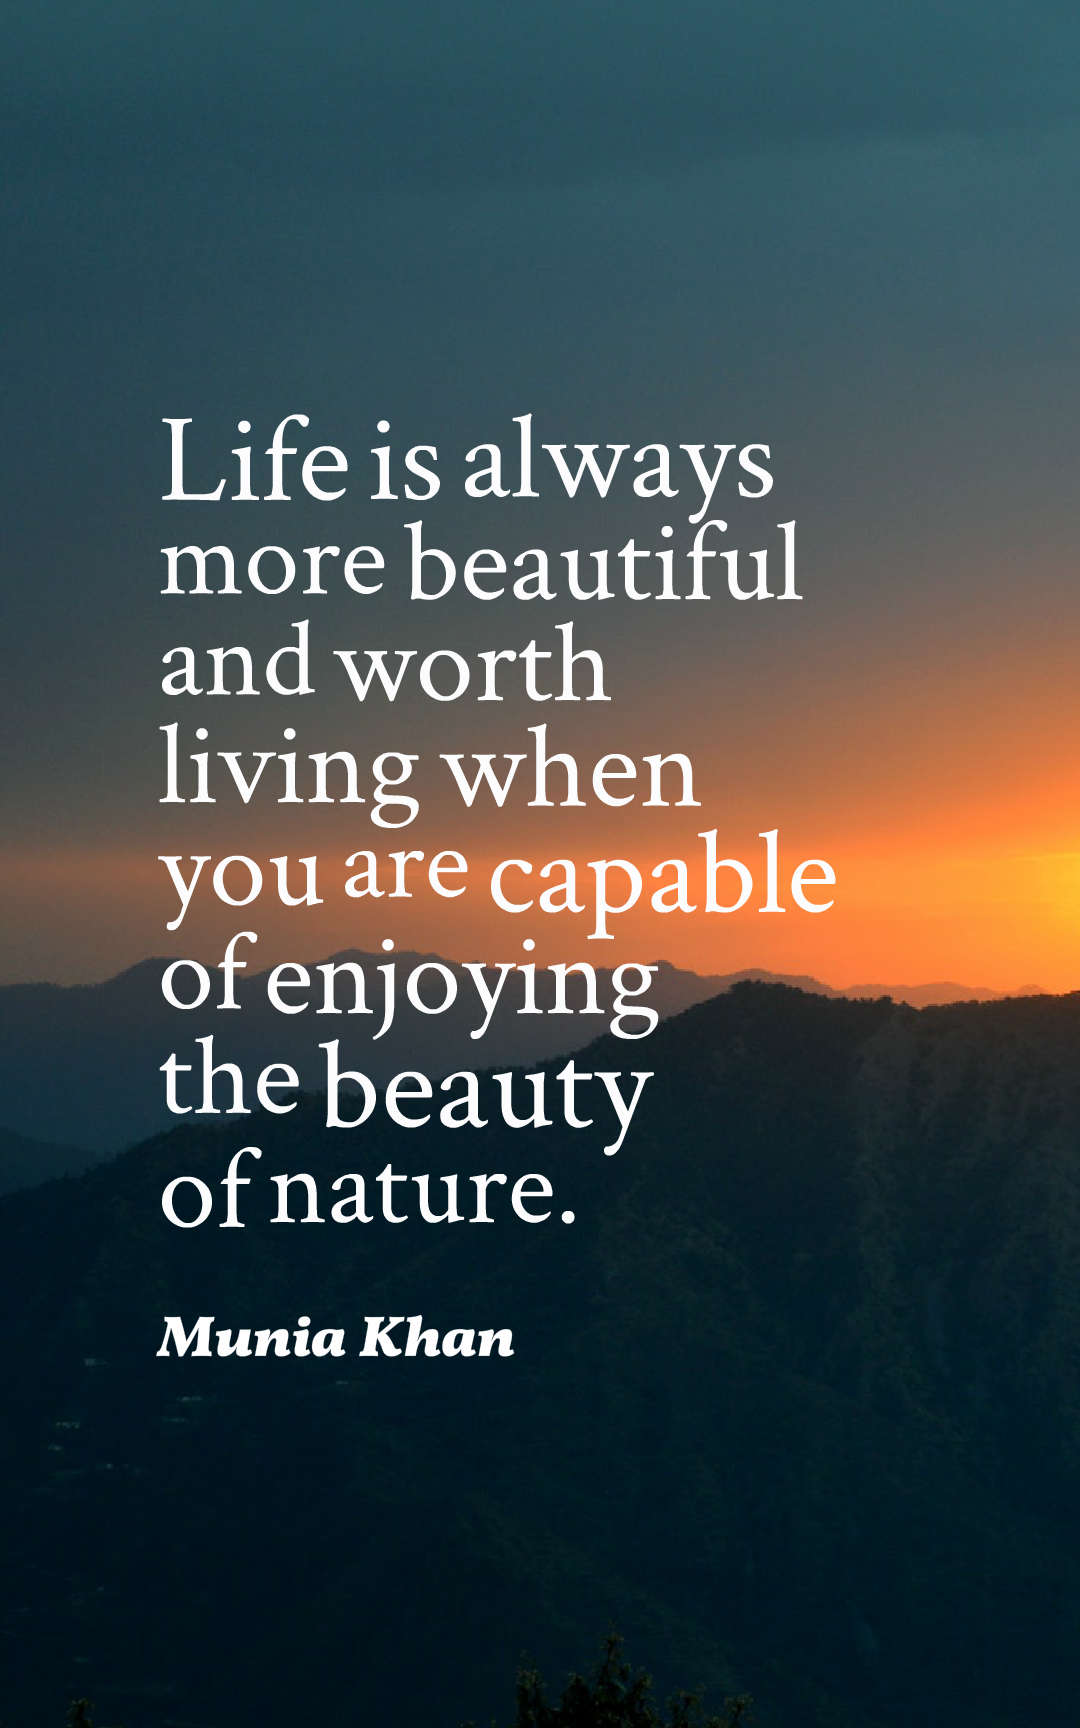 Life is always more beautiful and worth living when you are capable of enjoying the beauty of nature.